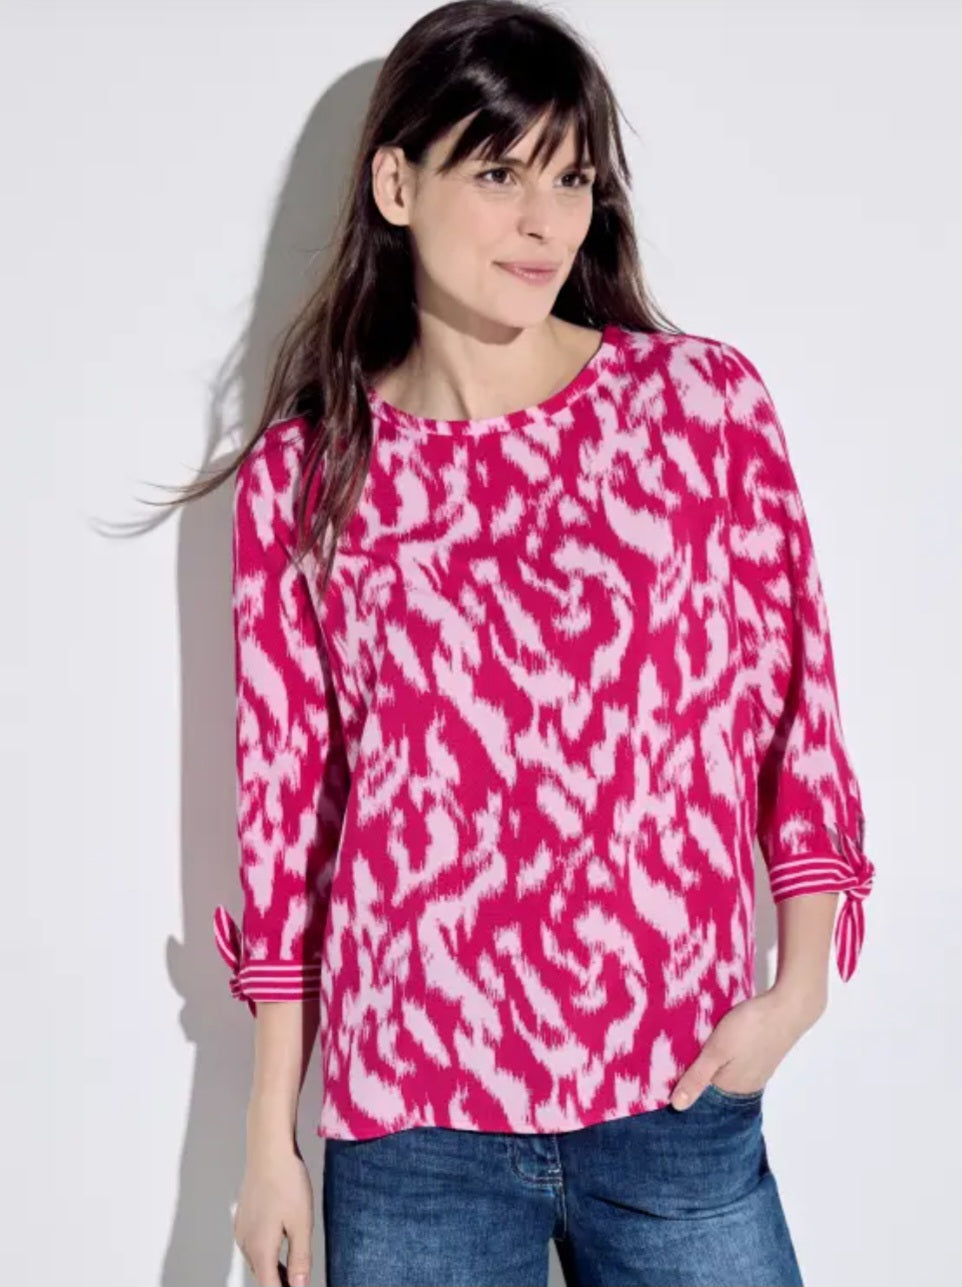 CECIL Mixed Print Blouse (Pink sorbet)